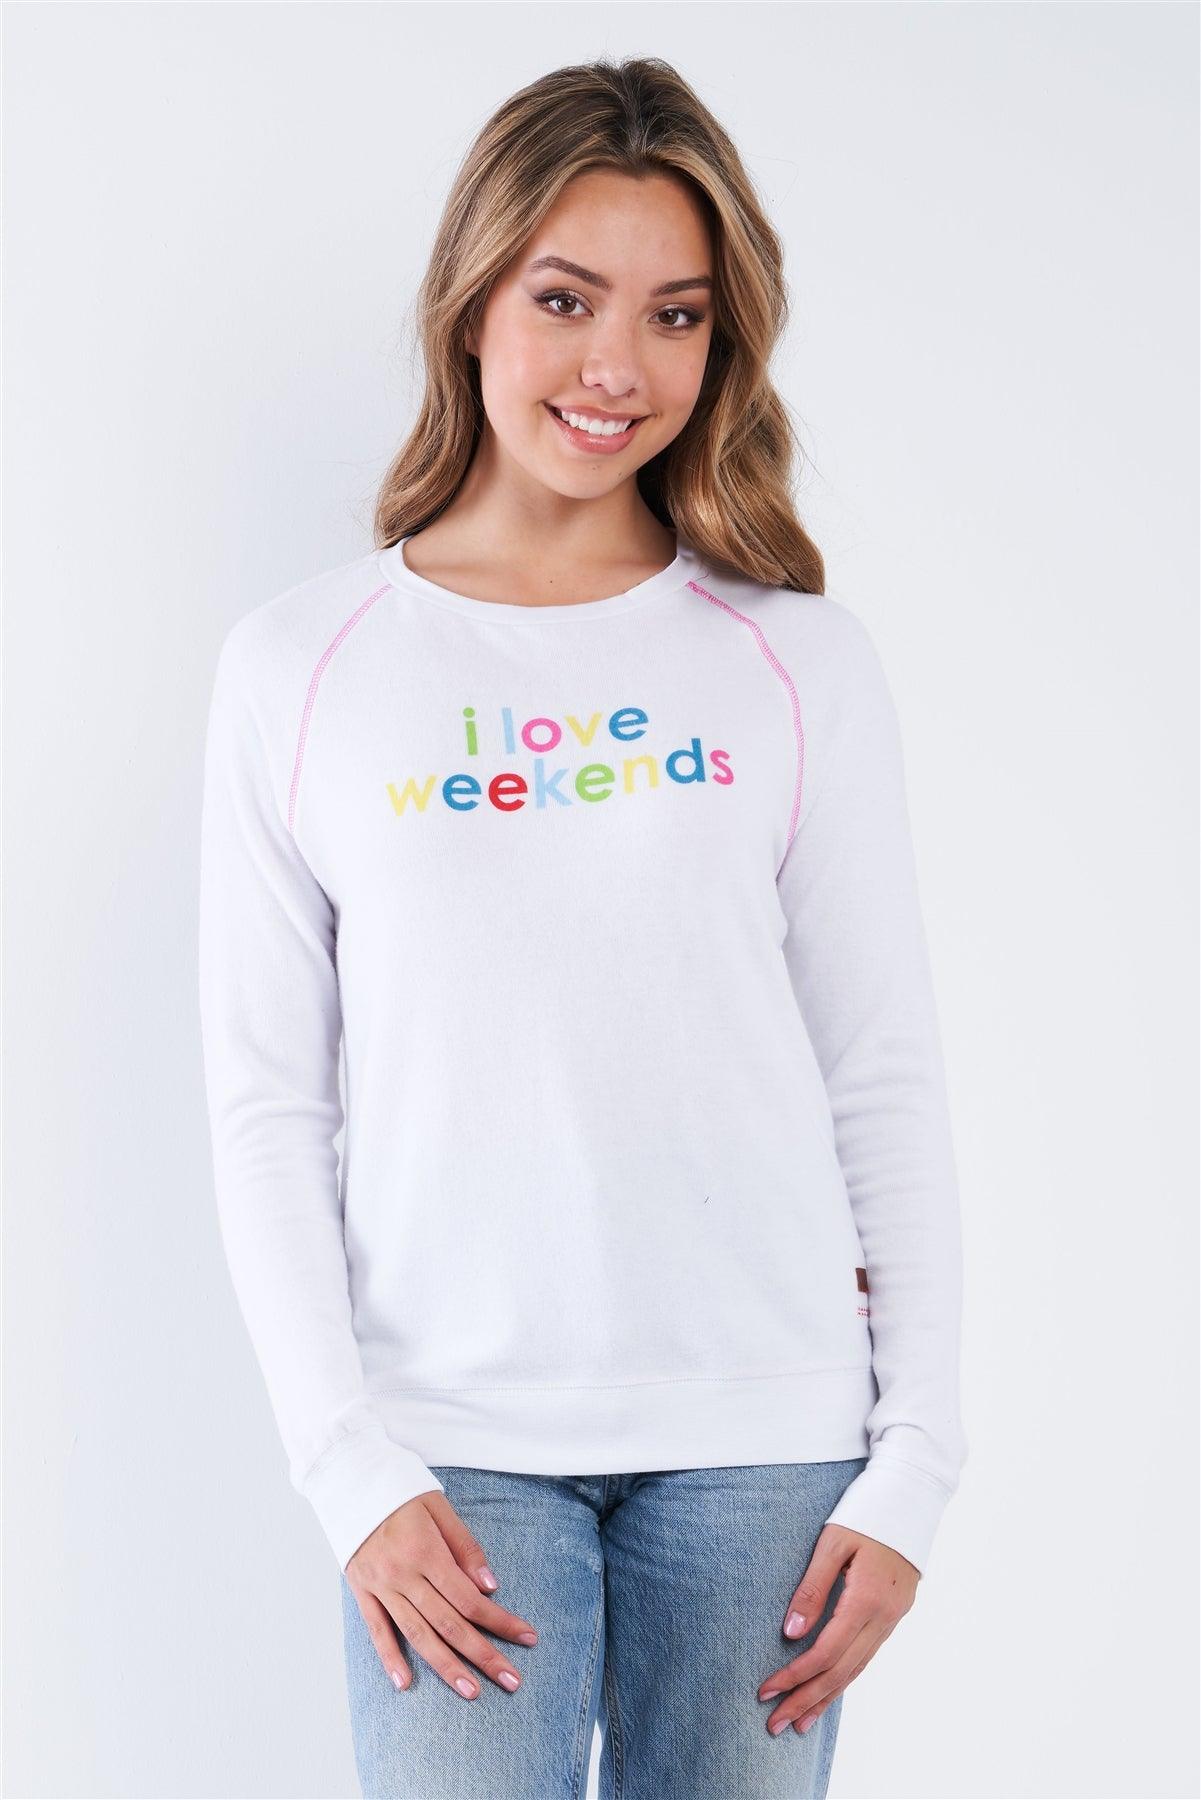 White Long Sleeve Comfy Crew Neck "I Love Weekends" Top